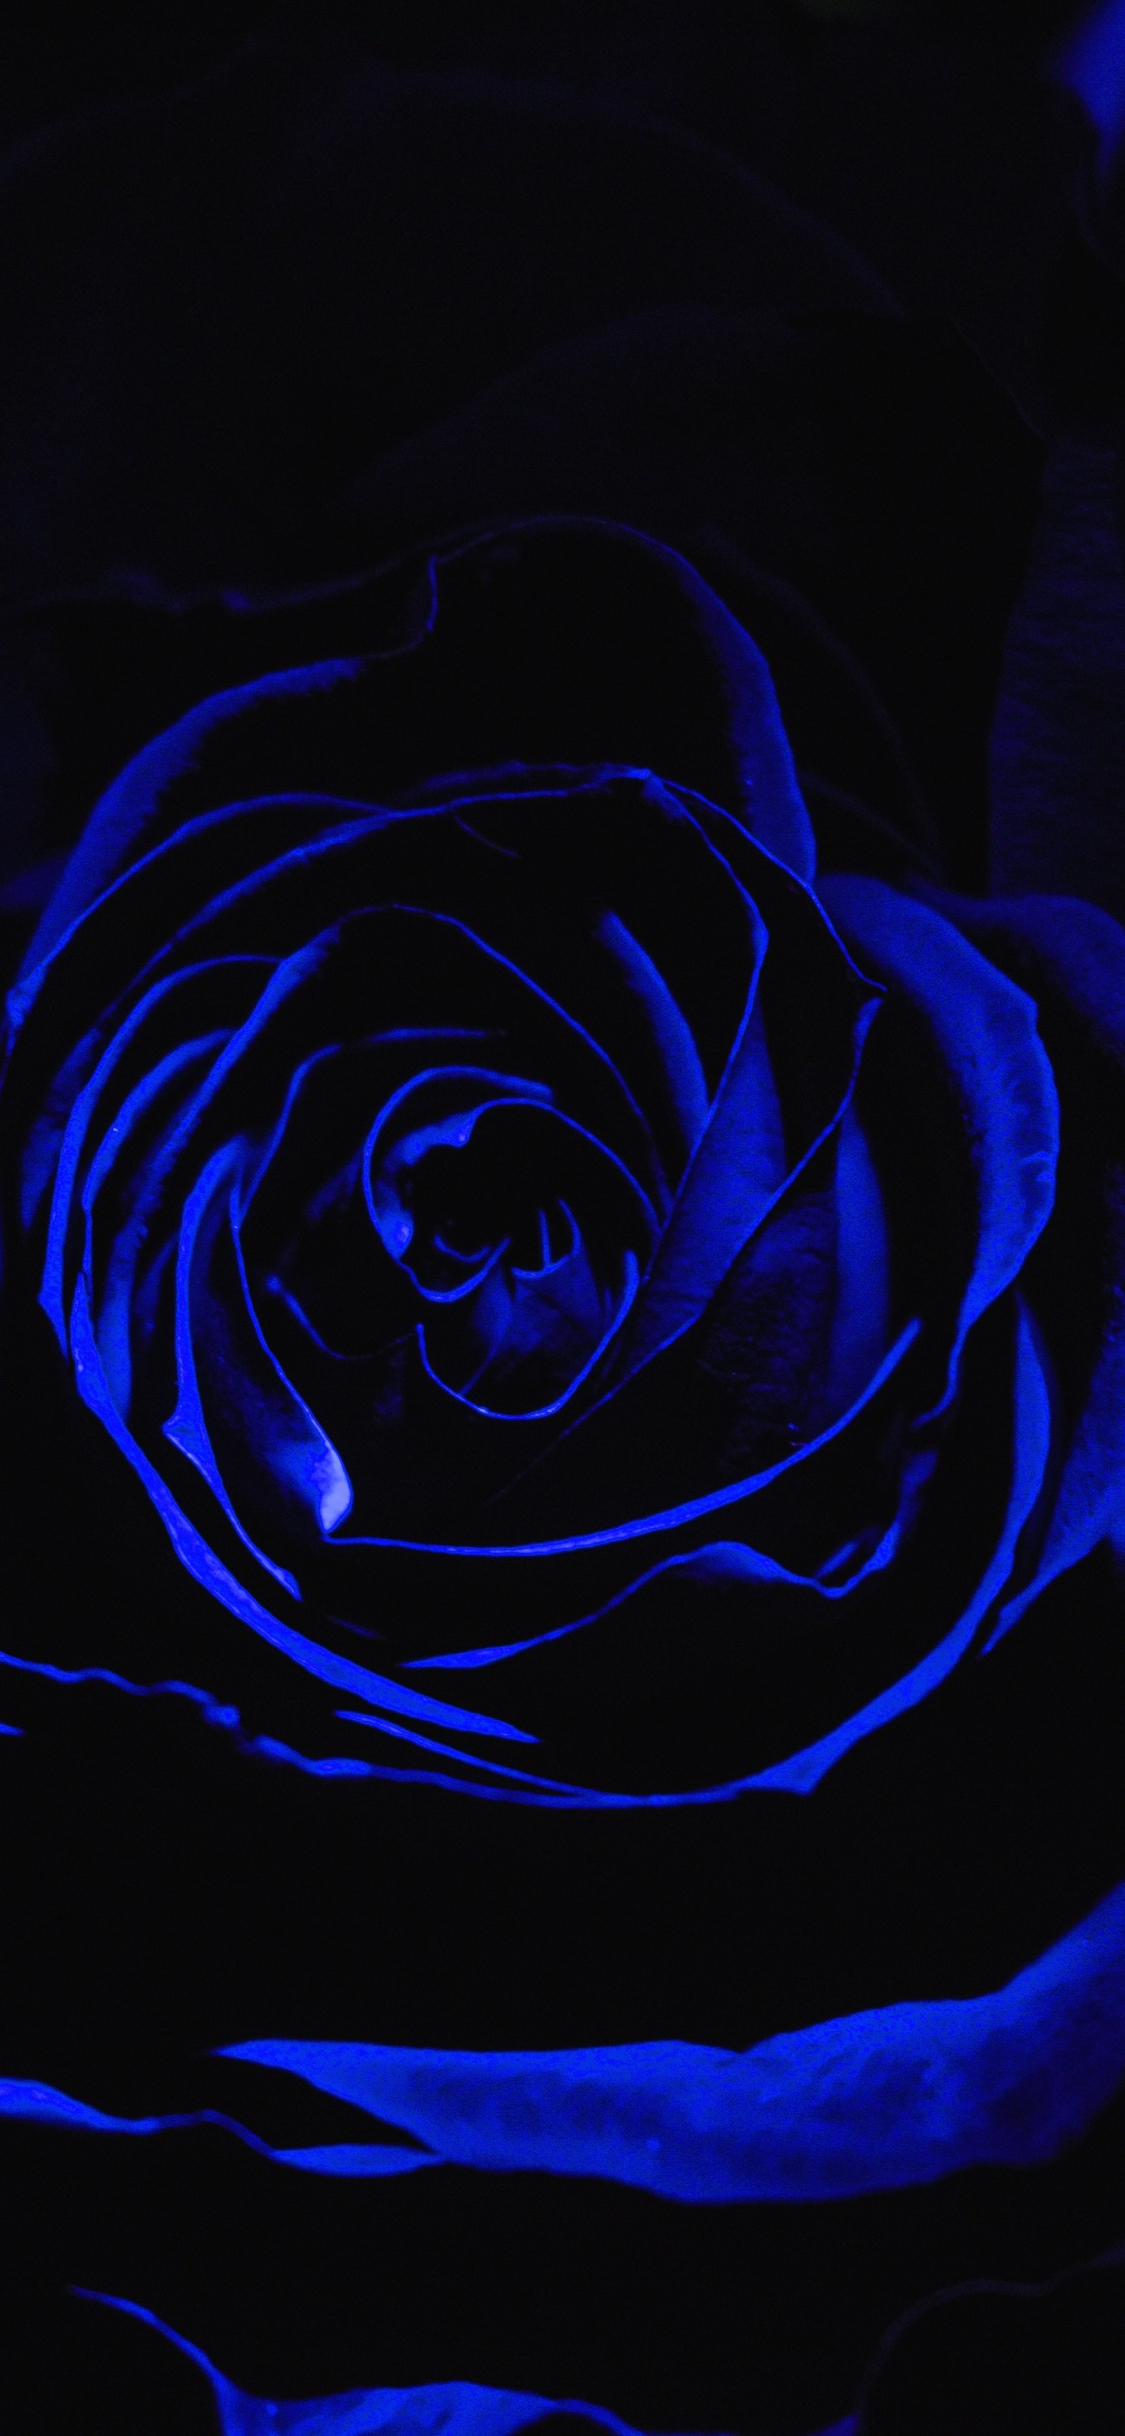 Premium AI Image  Roses wallpapers for iphone is the best high definition iphone  wallpaper in you can make this wallpaper for your iphone x backgrounds  mobile screensaver or ipad lock screen